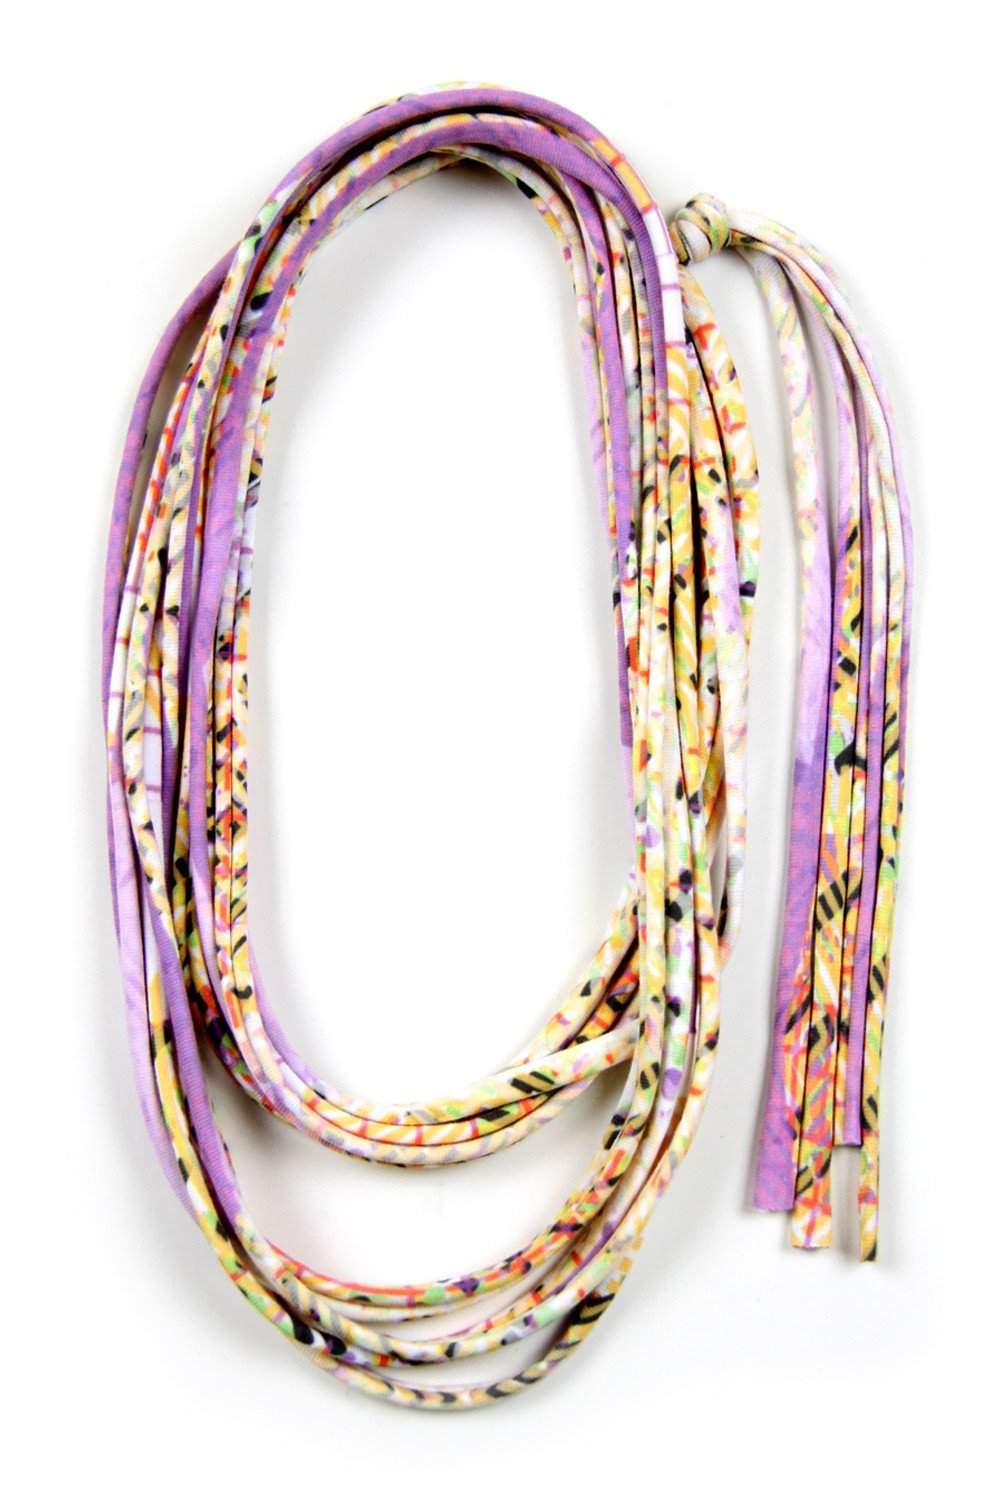 Lavender Yellow Skinny Scarf Necklace